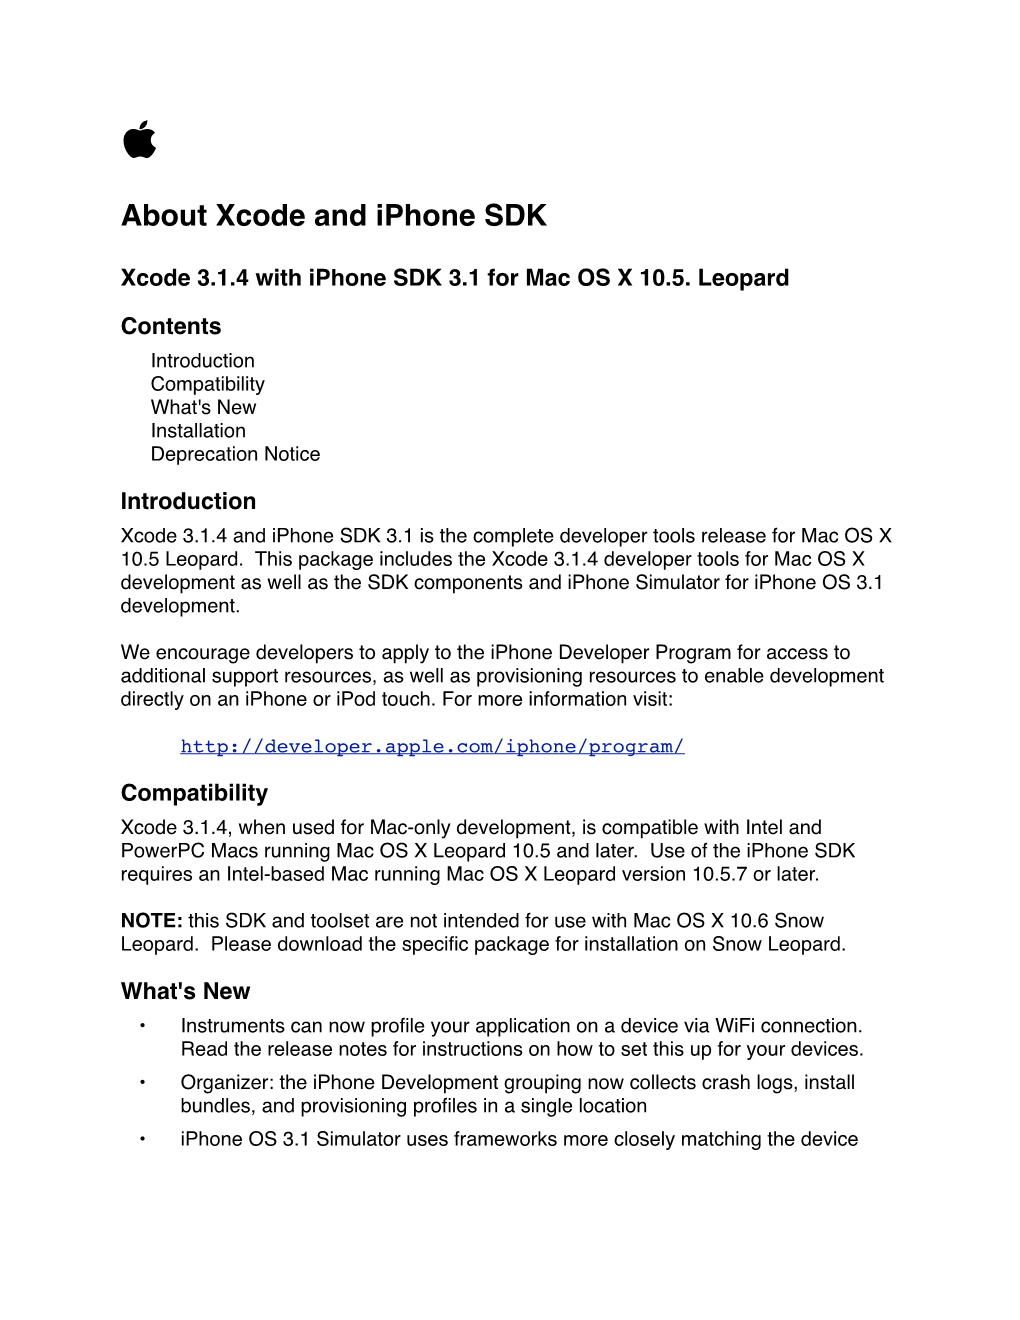 Final About Xcode 3.1 and Iphone SDK 3.1 (Leopard)